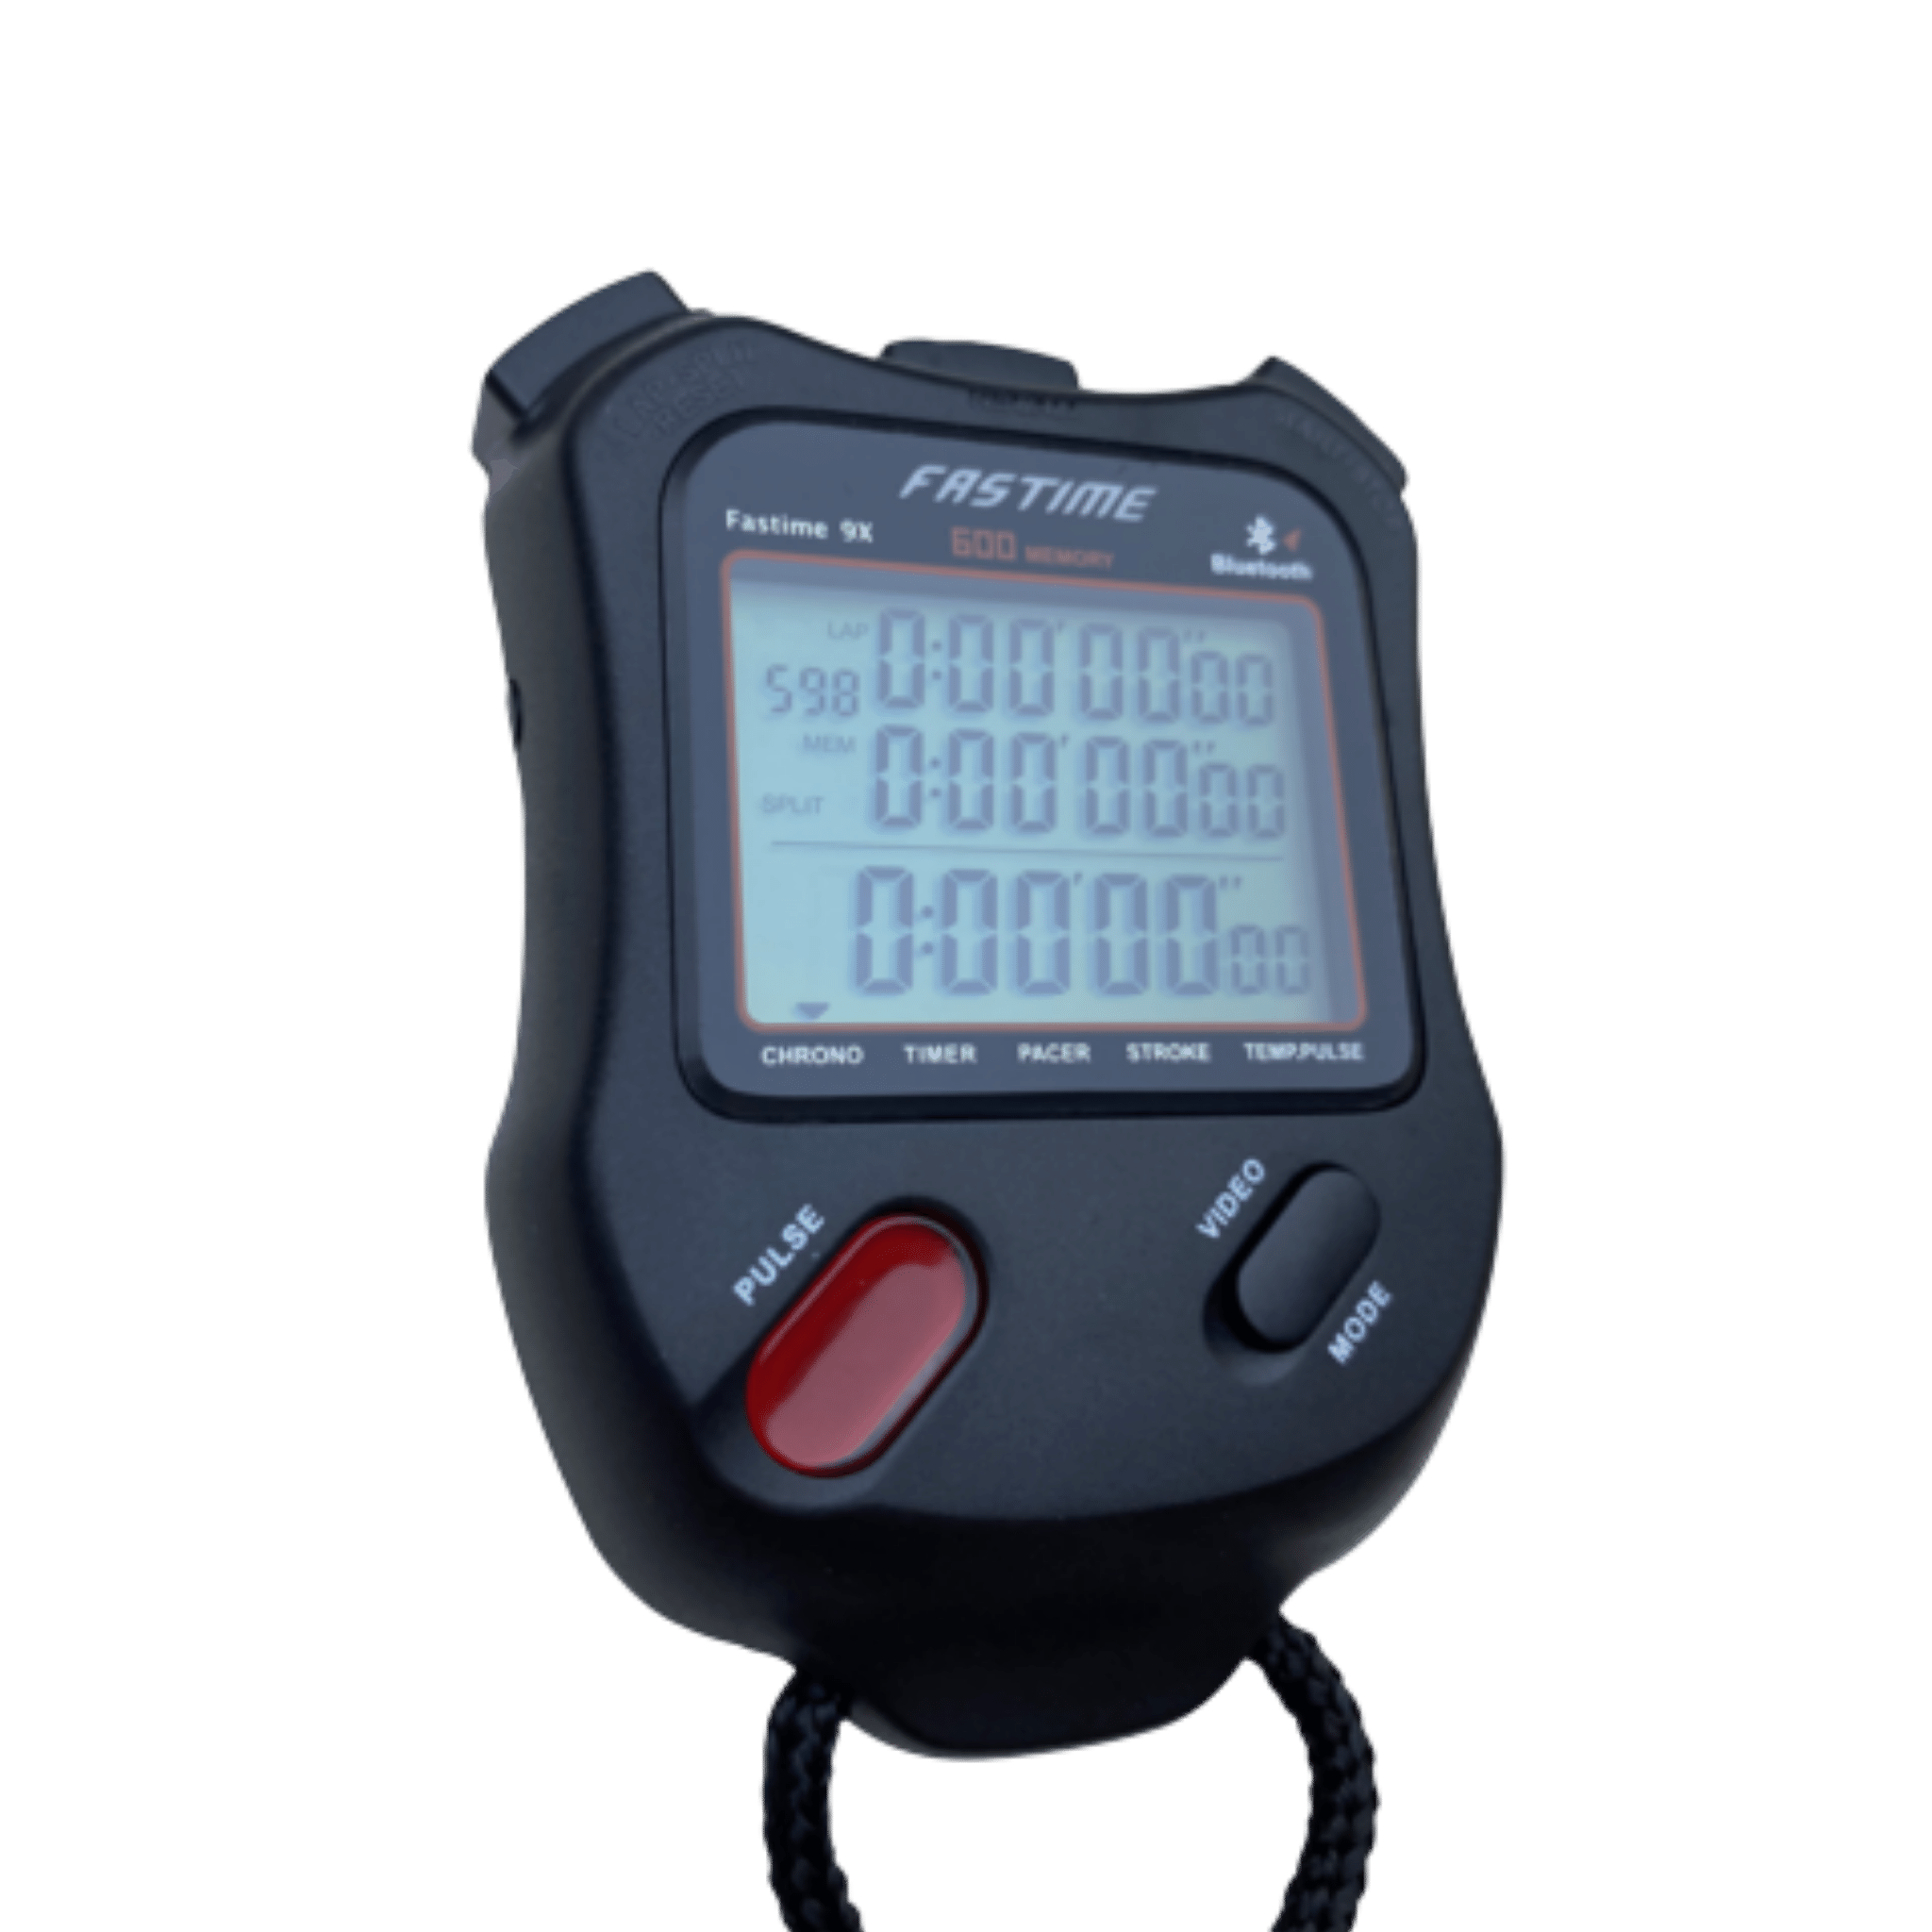 Fastime 9X Stopwatch for Athletes